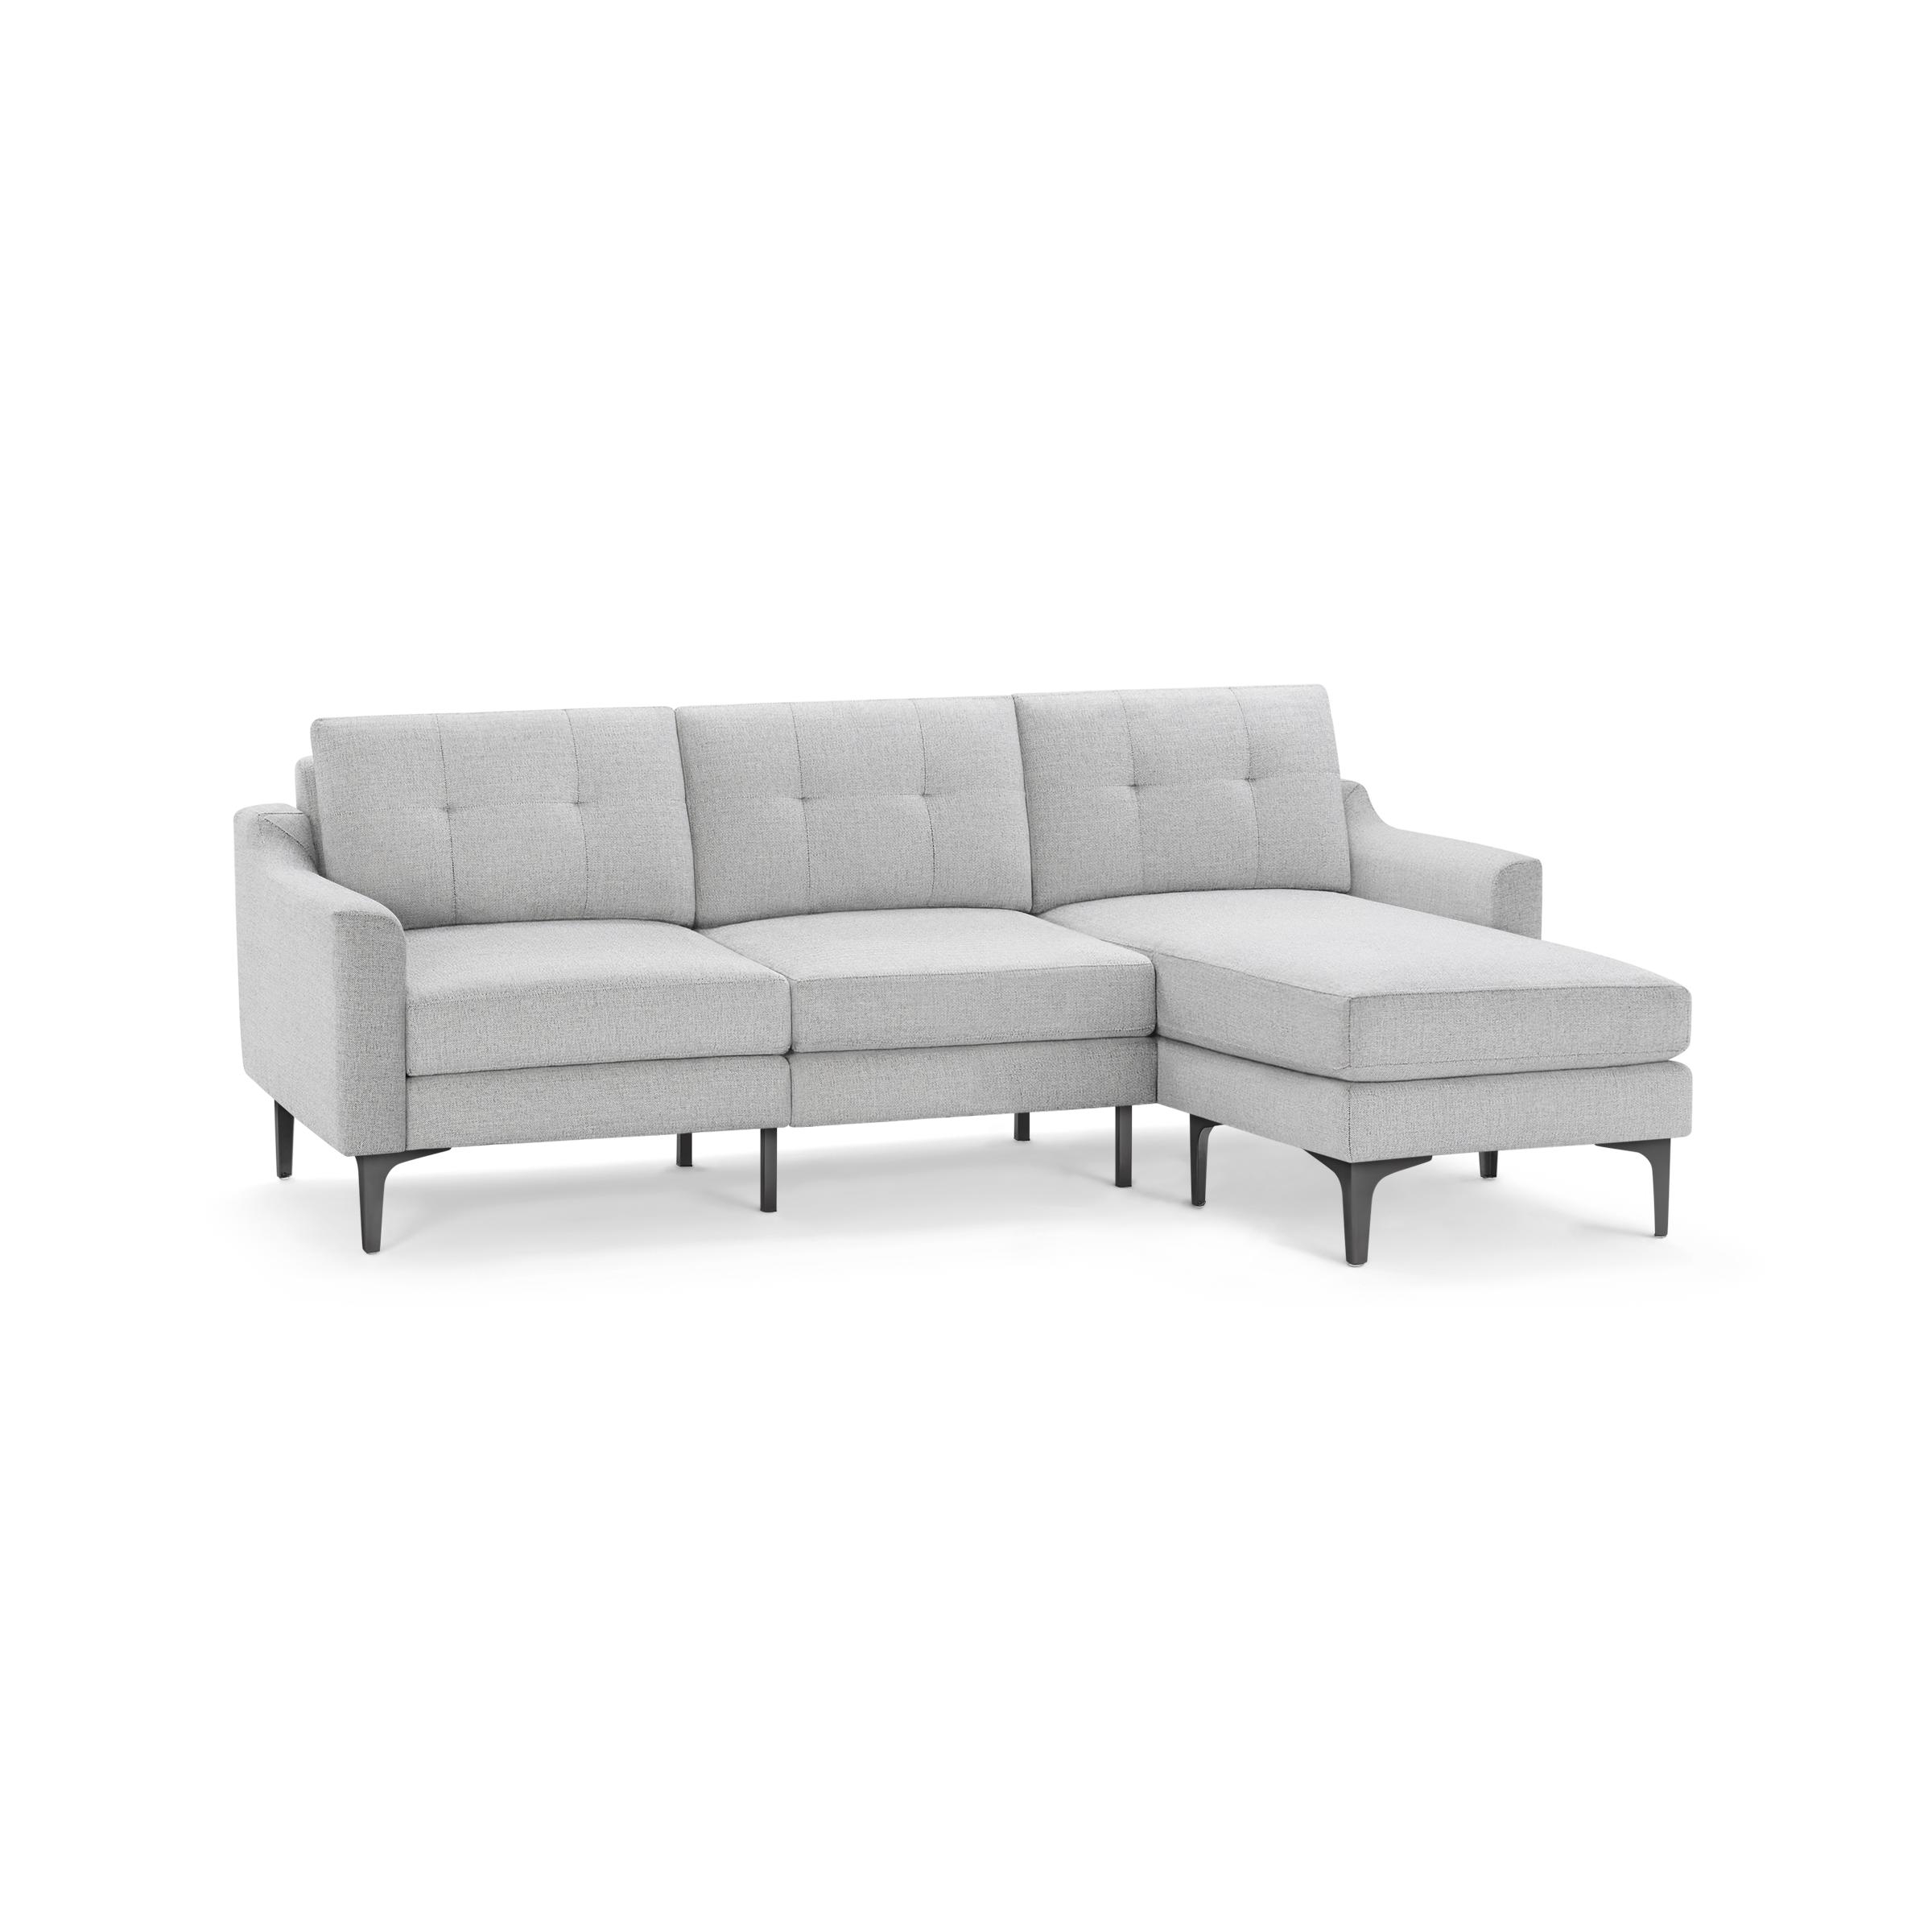 The Slope Nomad Sectional Sofa in Crushed Gravel - Image 1